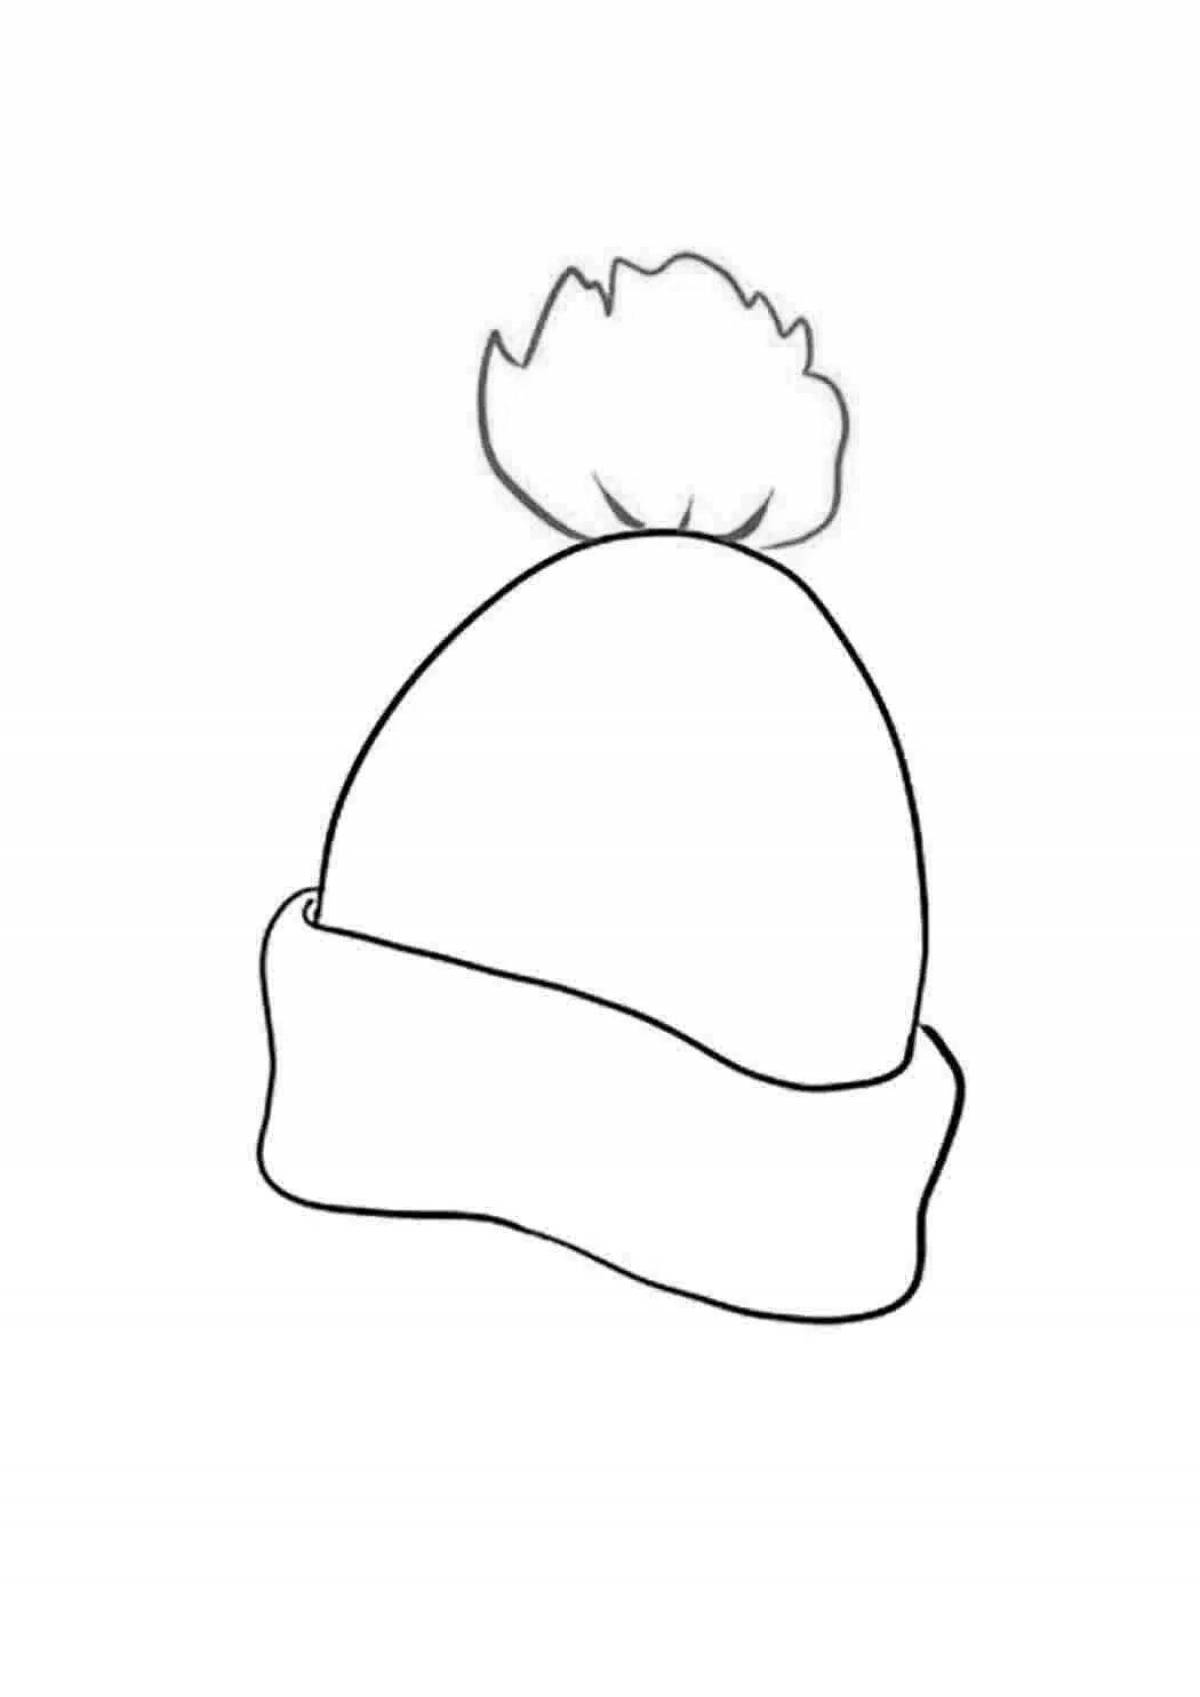 Coloring book playful baby hat